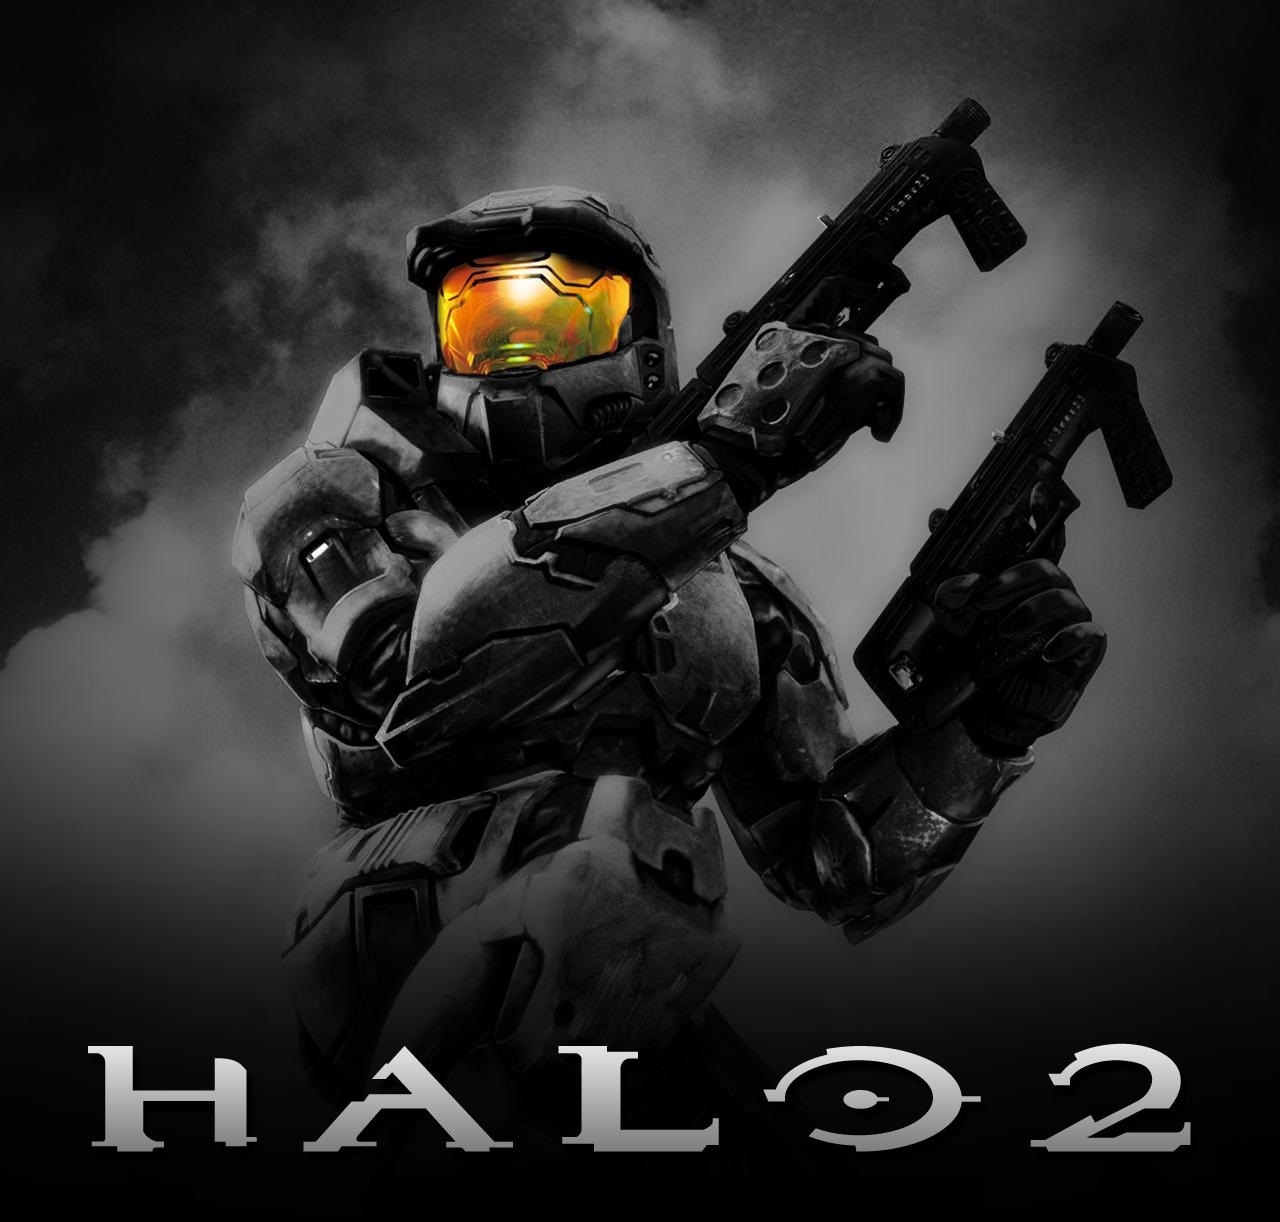 Halo 2 game pc download download game the warriors pc